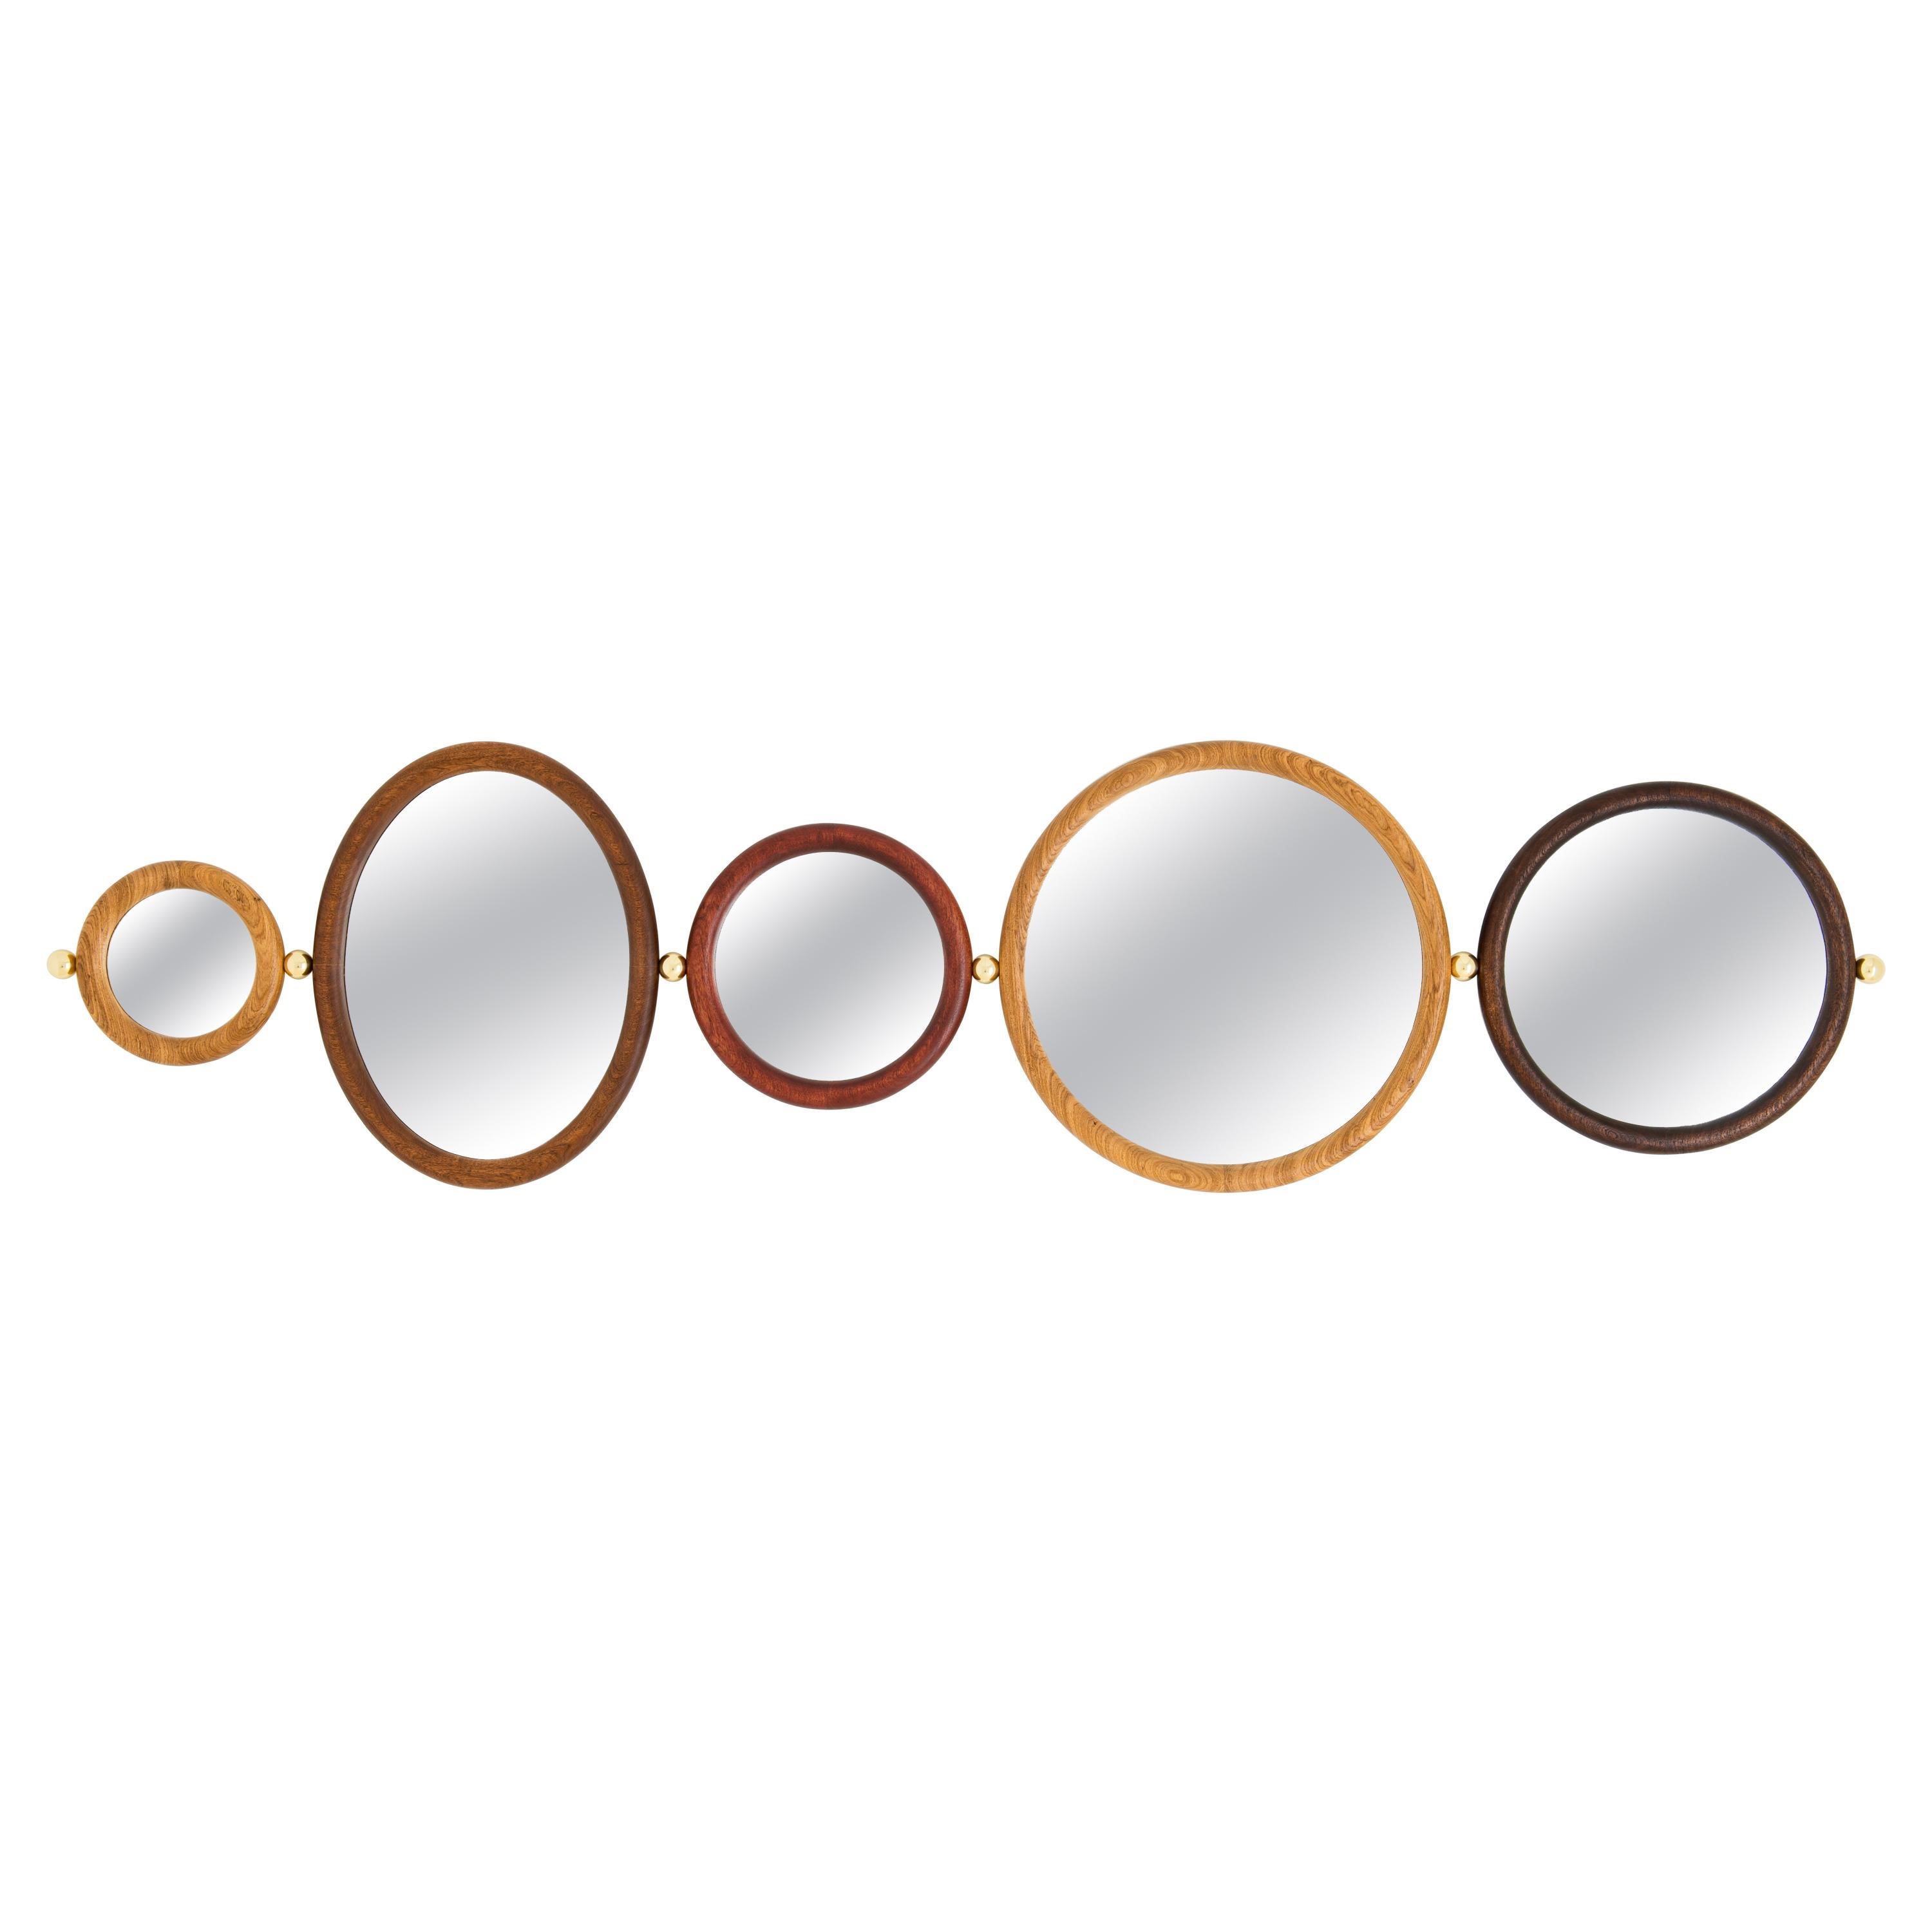 Set of 5 Aro Mirrors by Leandro Garcia Contemporary Brazil Design For Sale